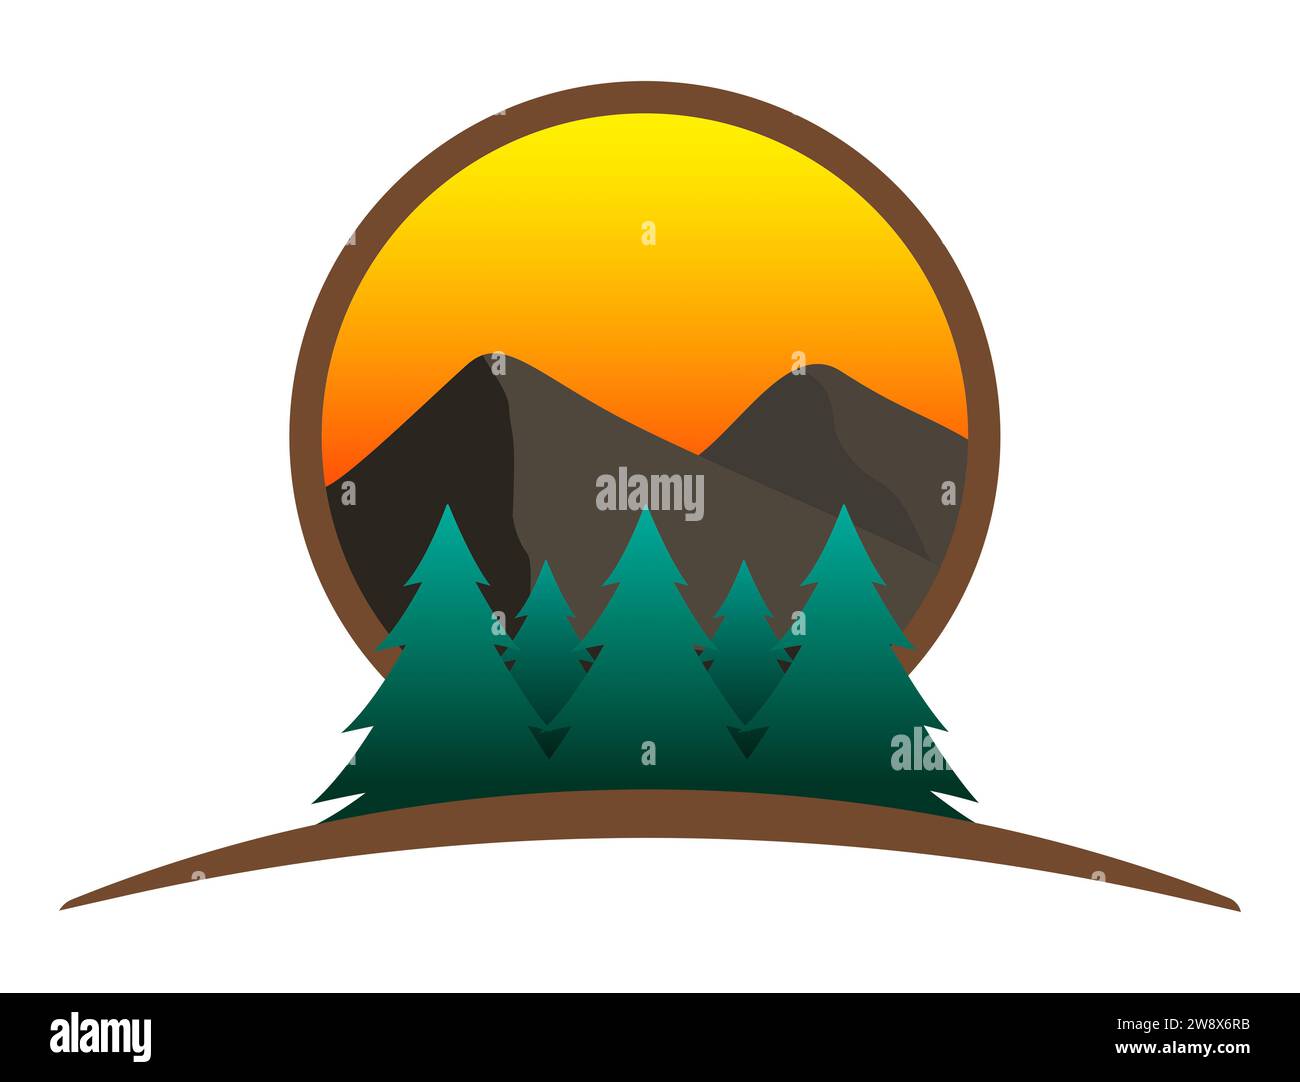 Sunset landscape with pine trees and mountains in a circle design - Illustration Stock Photo